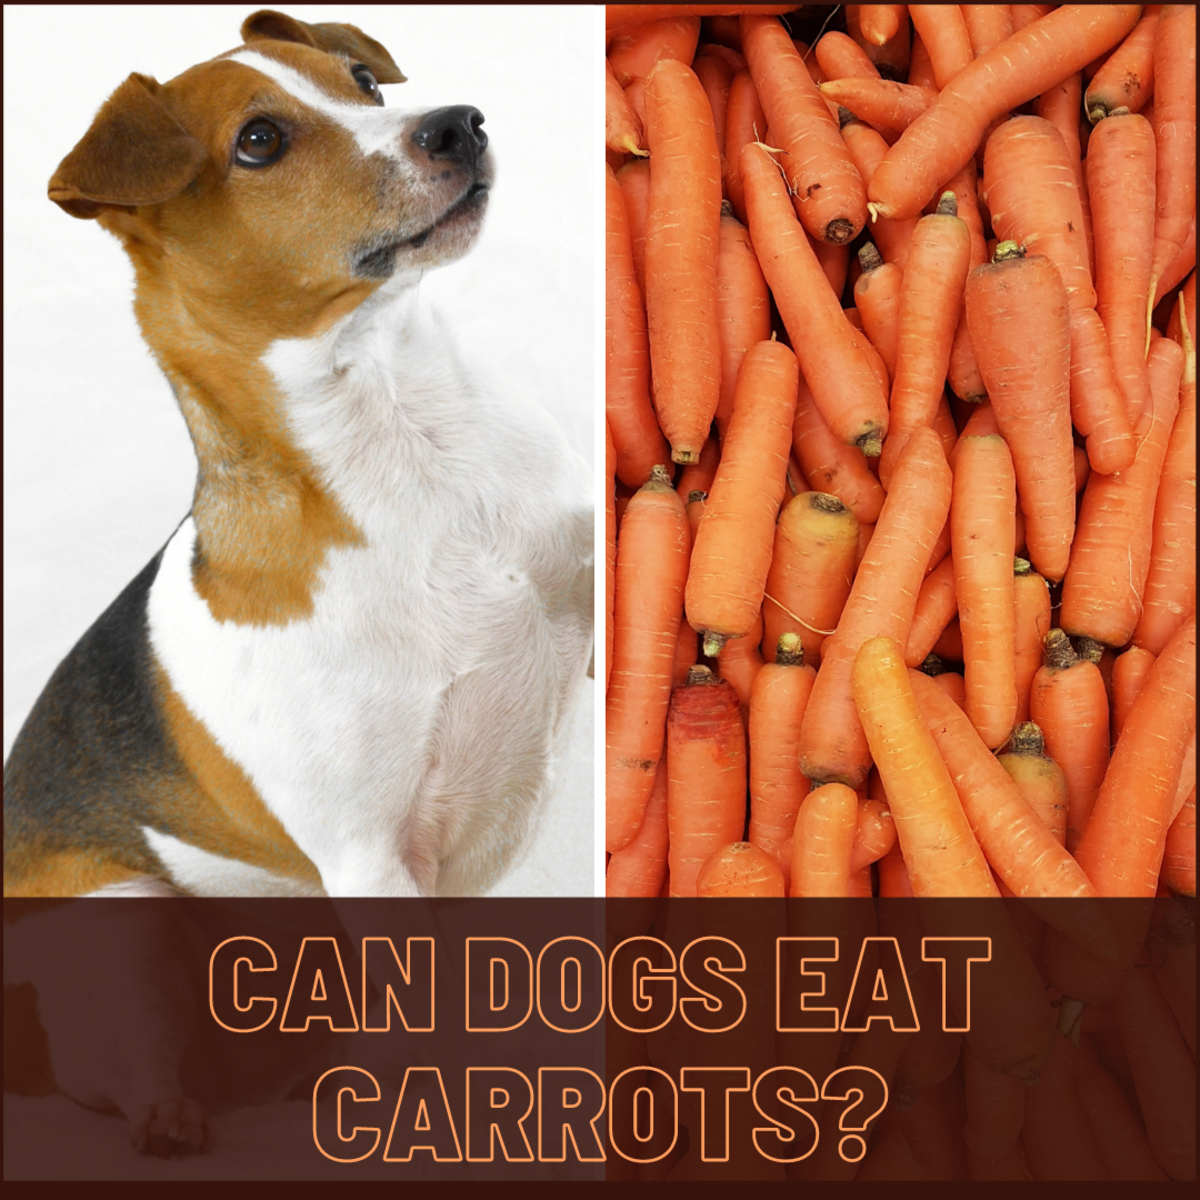 Can your best friend can eat carrots? Find out
here.